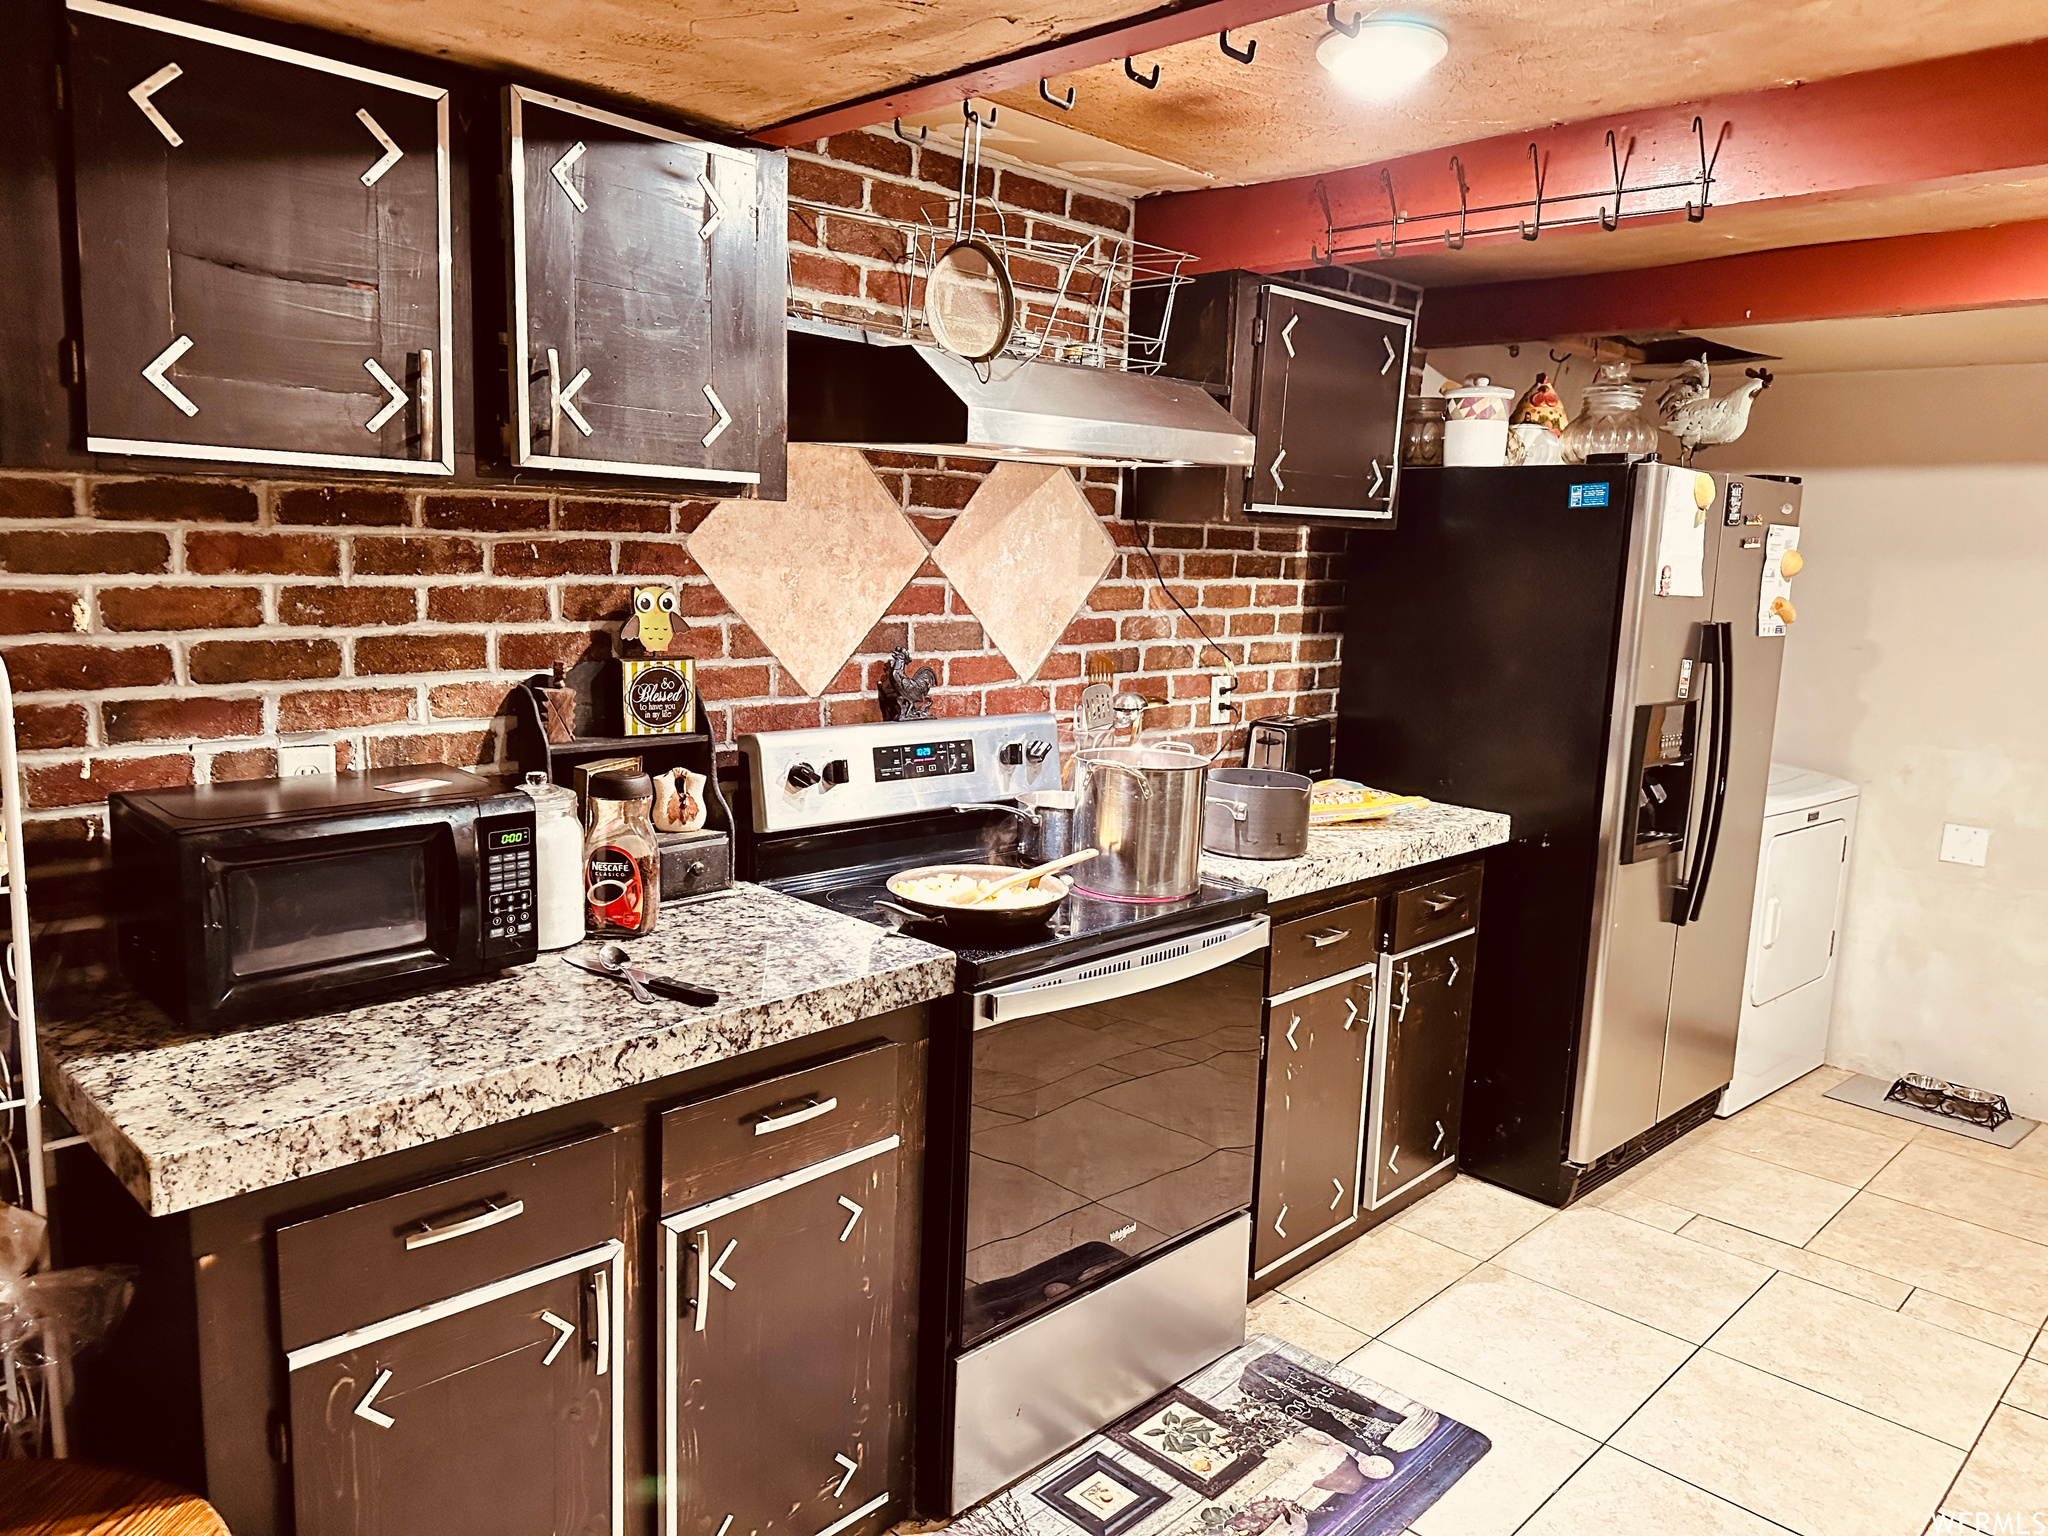 Kitchen with stainless steel appliances, dark brown cabinets, light tile floors, and brick wall